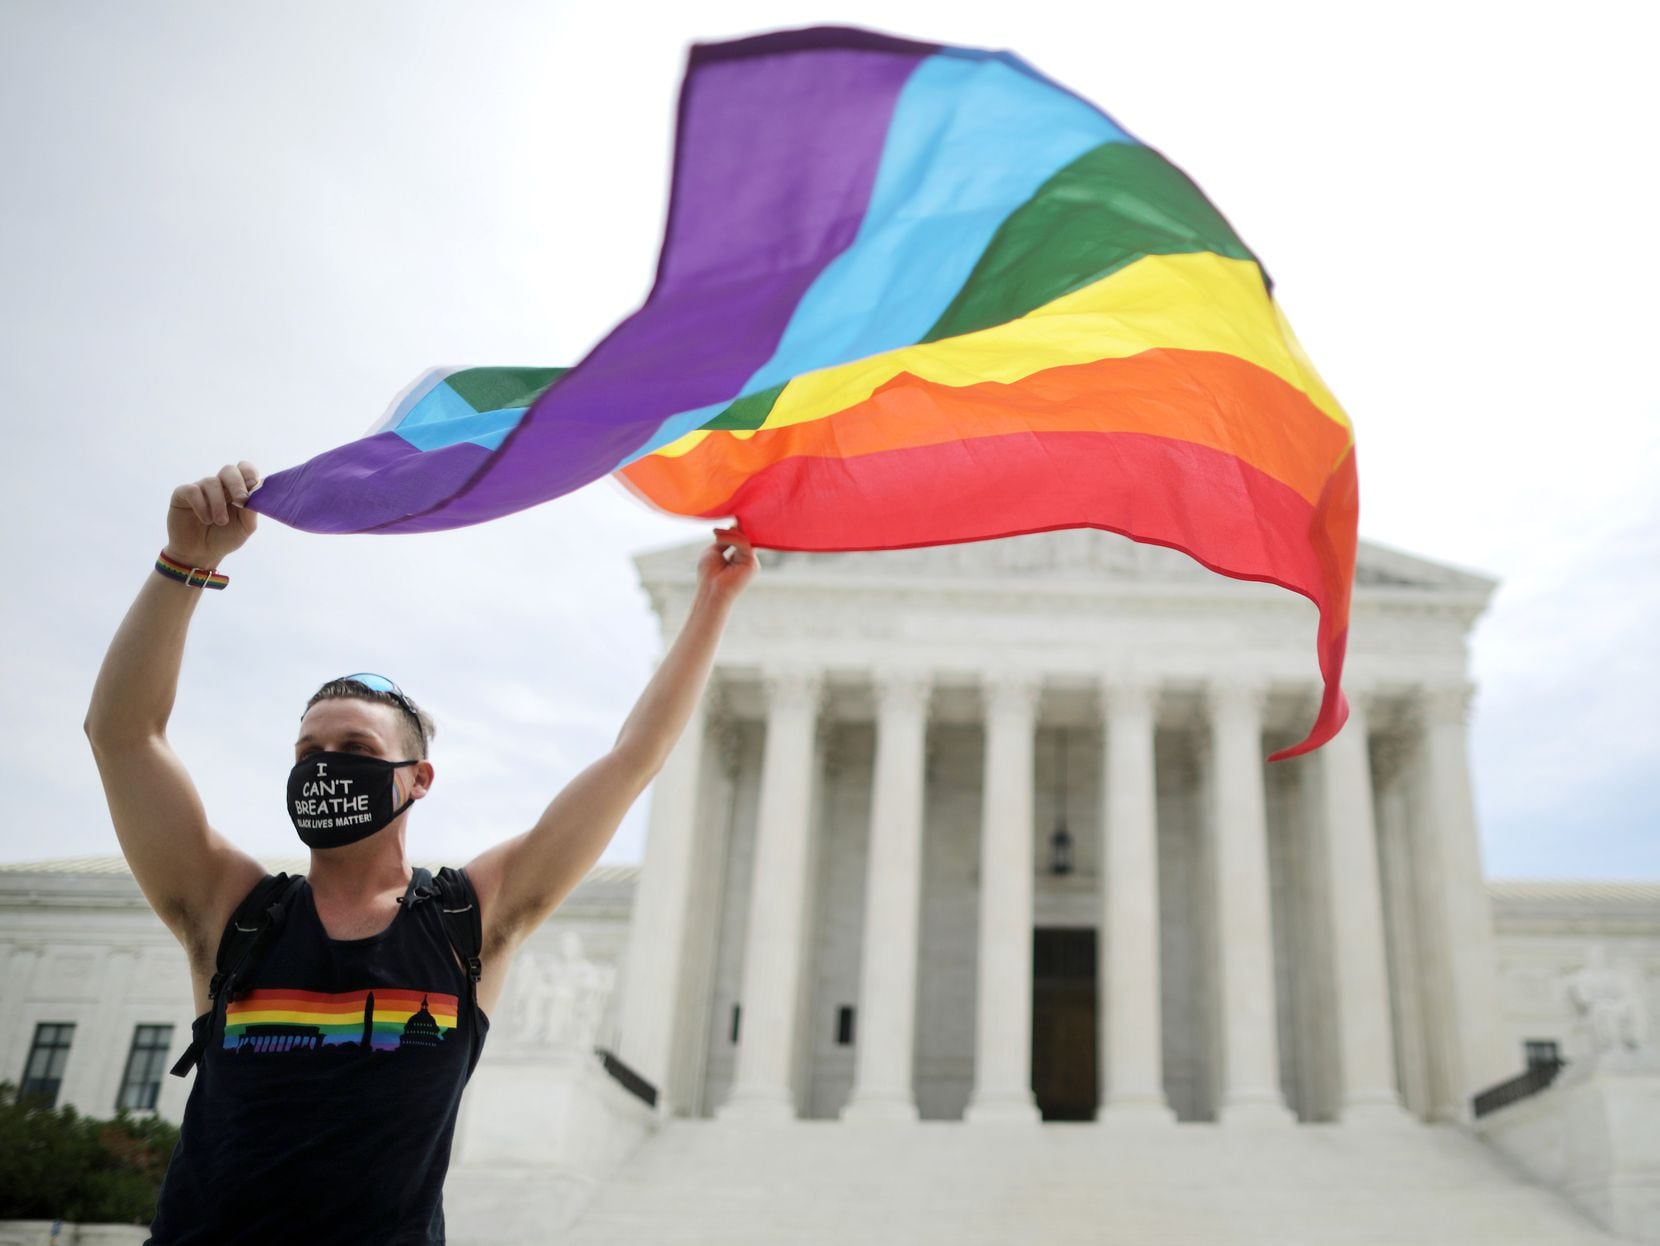 Joseph Fons, holding a Pride Flag, stands in front of the U.S. Supreme Court building after the court ruled that LGBTQ people can not be disciplined or fired based on their sexual orientation June 15, 2020 in Washington, DC. With Chief Justice John Roberts and Justice Neil Gorsuch joining the Democratic appointees, the court ruled 6-3 that the Civil Rights Act of 1964 bans bias based on sexual orientation or gender identity.